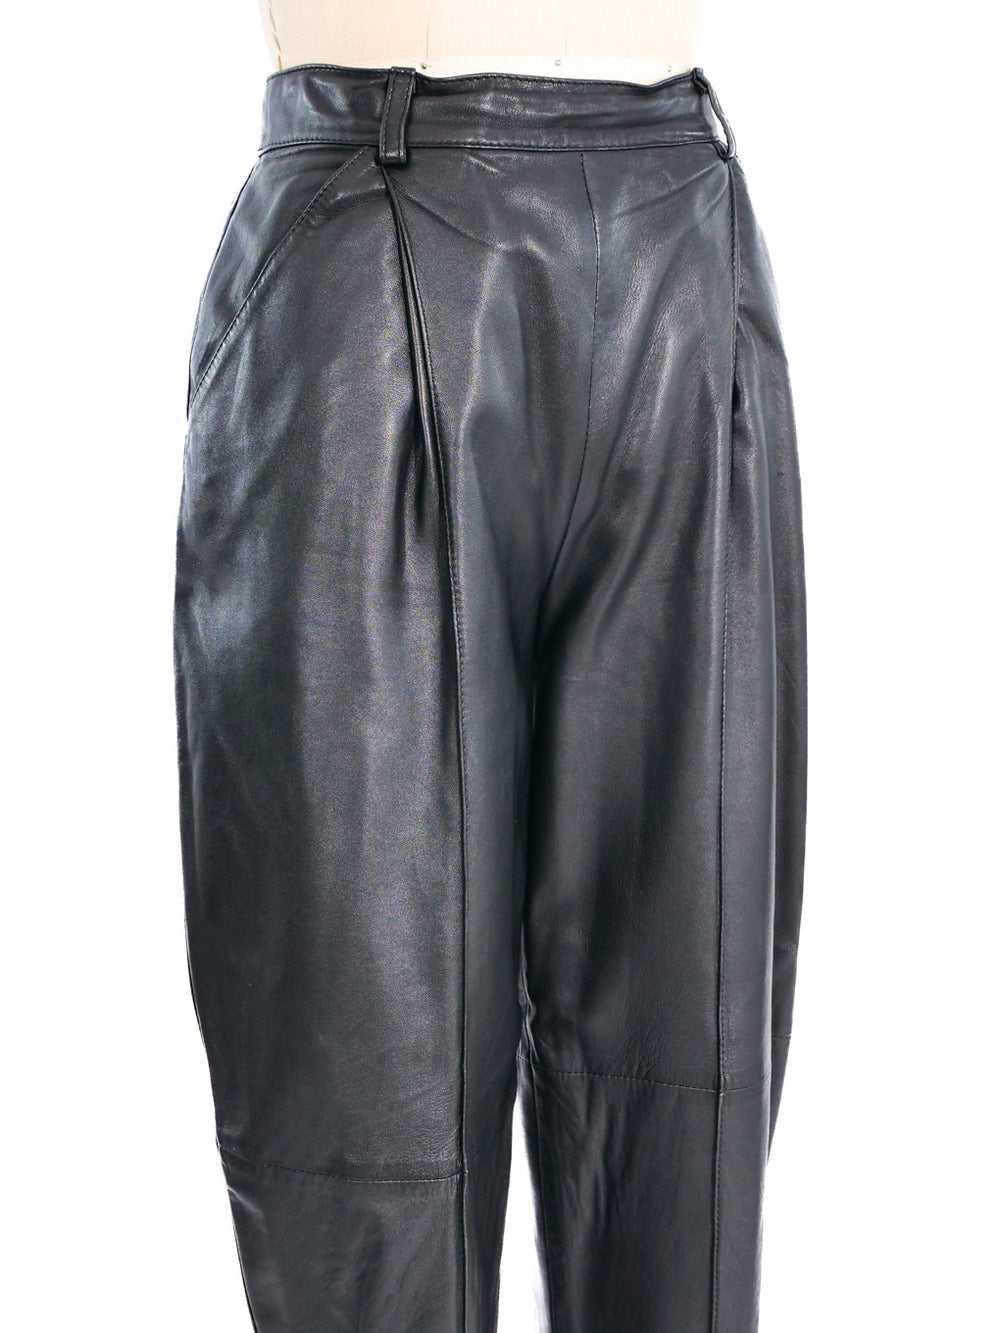 Versus By Gianni Versace Leather Trousers - image 2